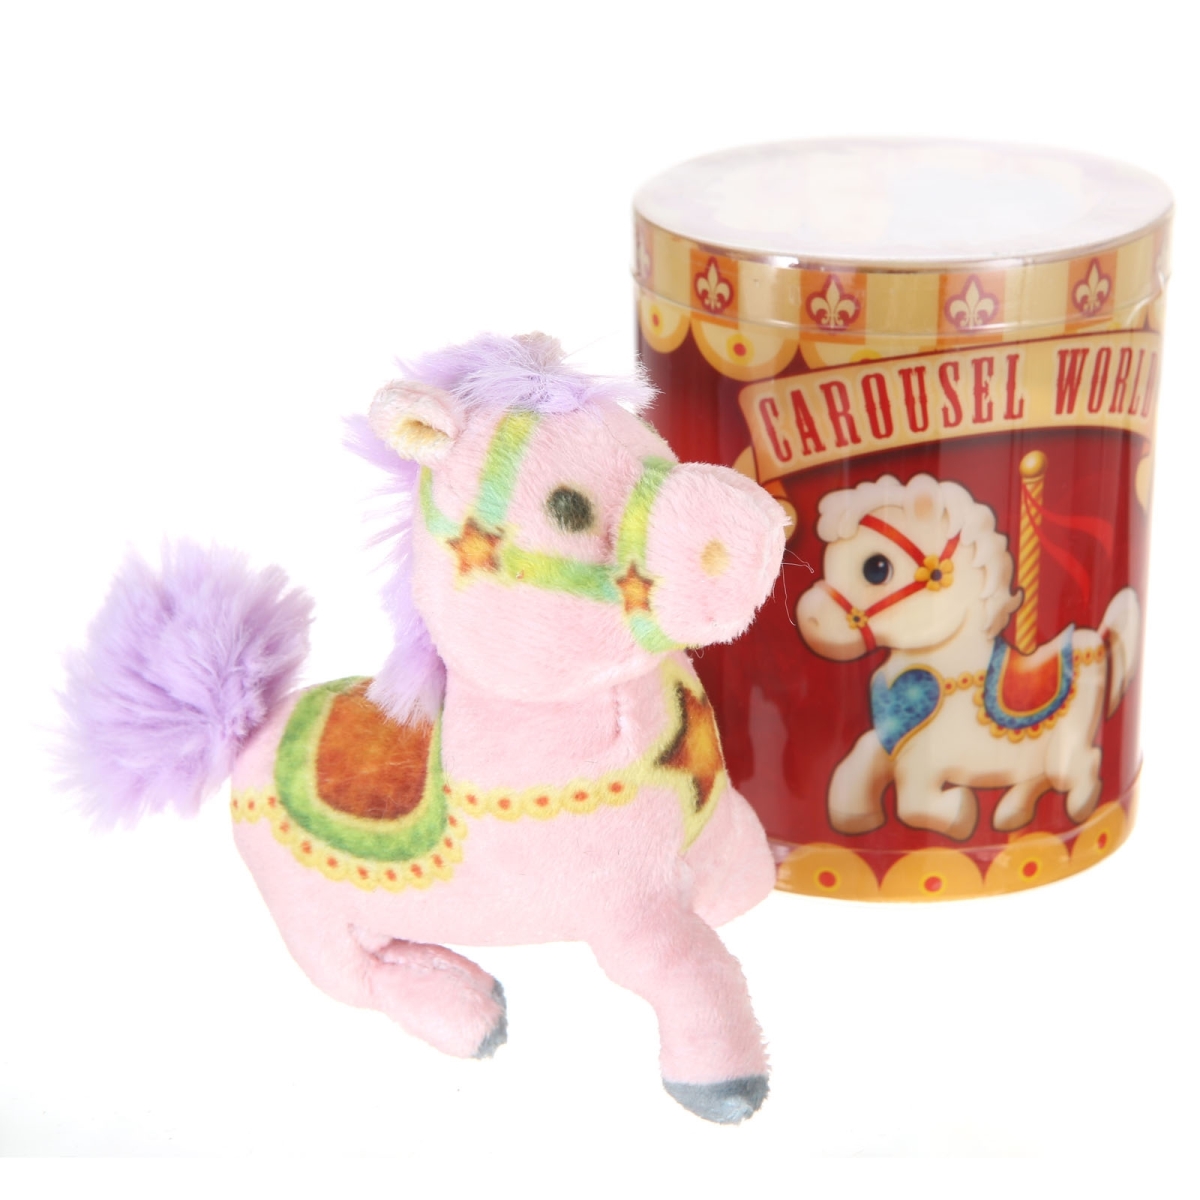 Cw01 Plush Carousel Horse - Assorted Color